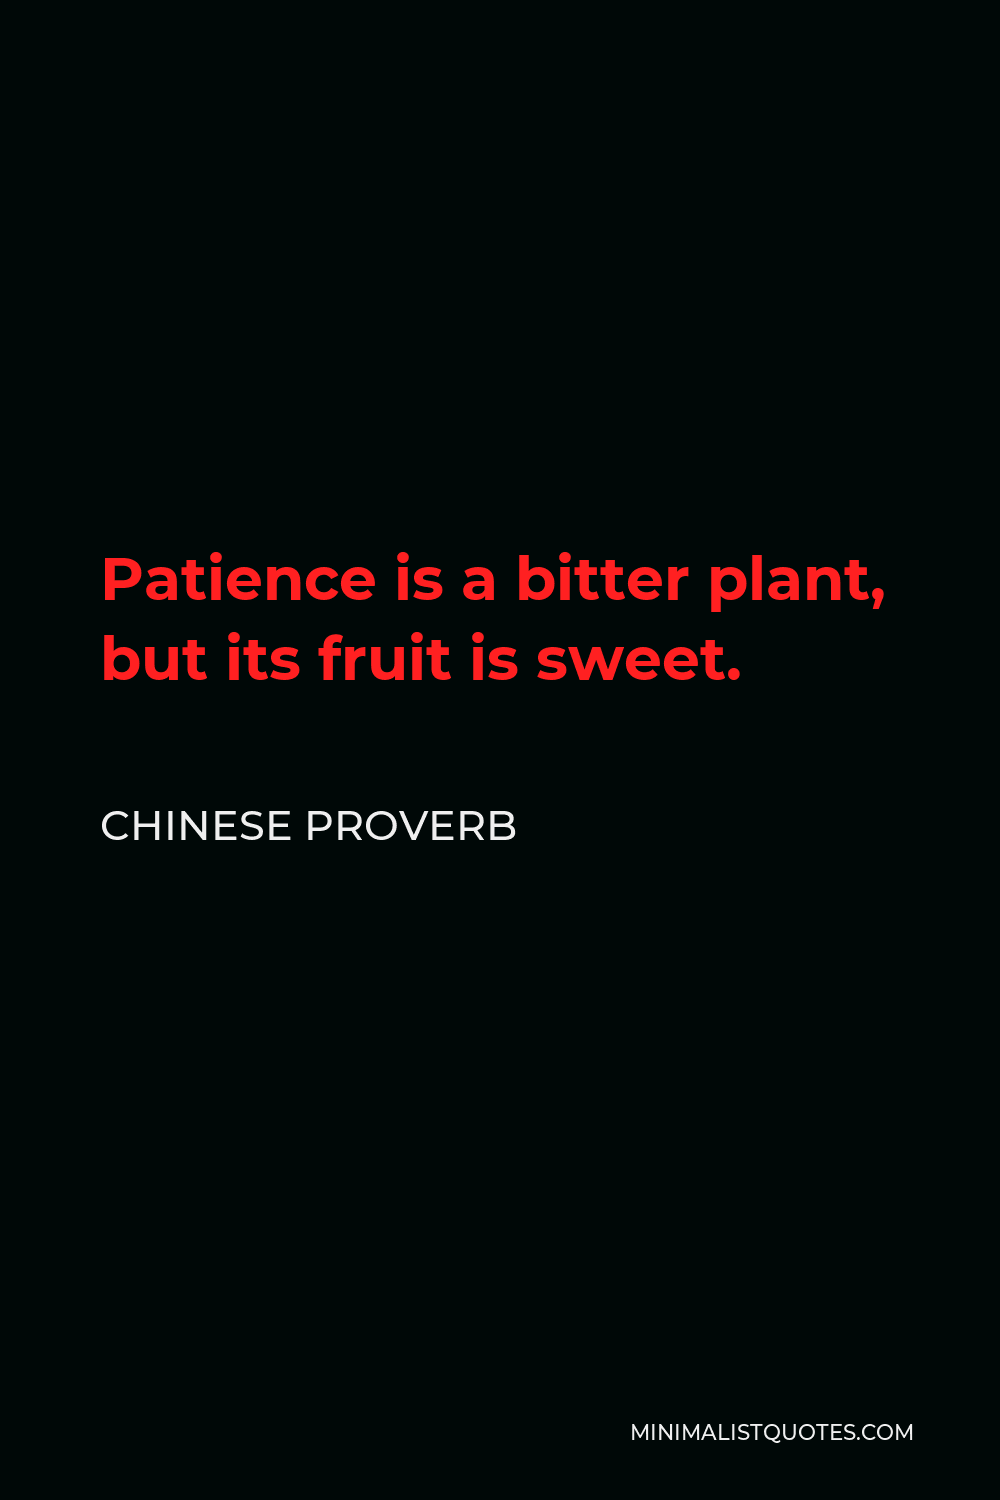 Chinese Proverb Quote - Patience is a bitter plant, but its fruit is sweet.